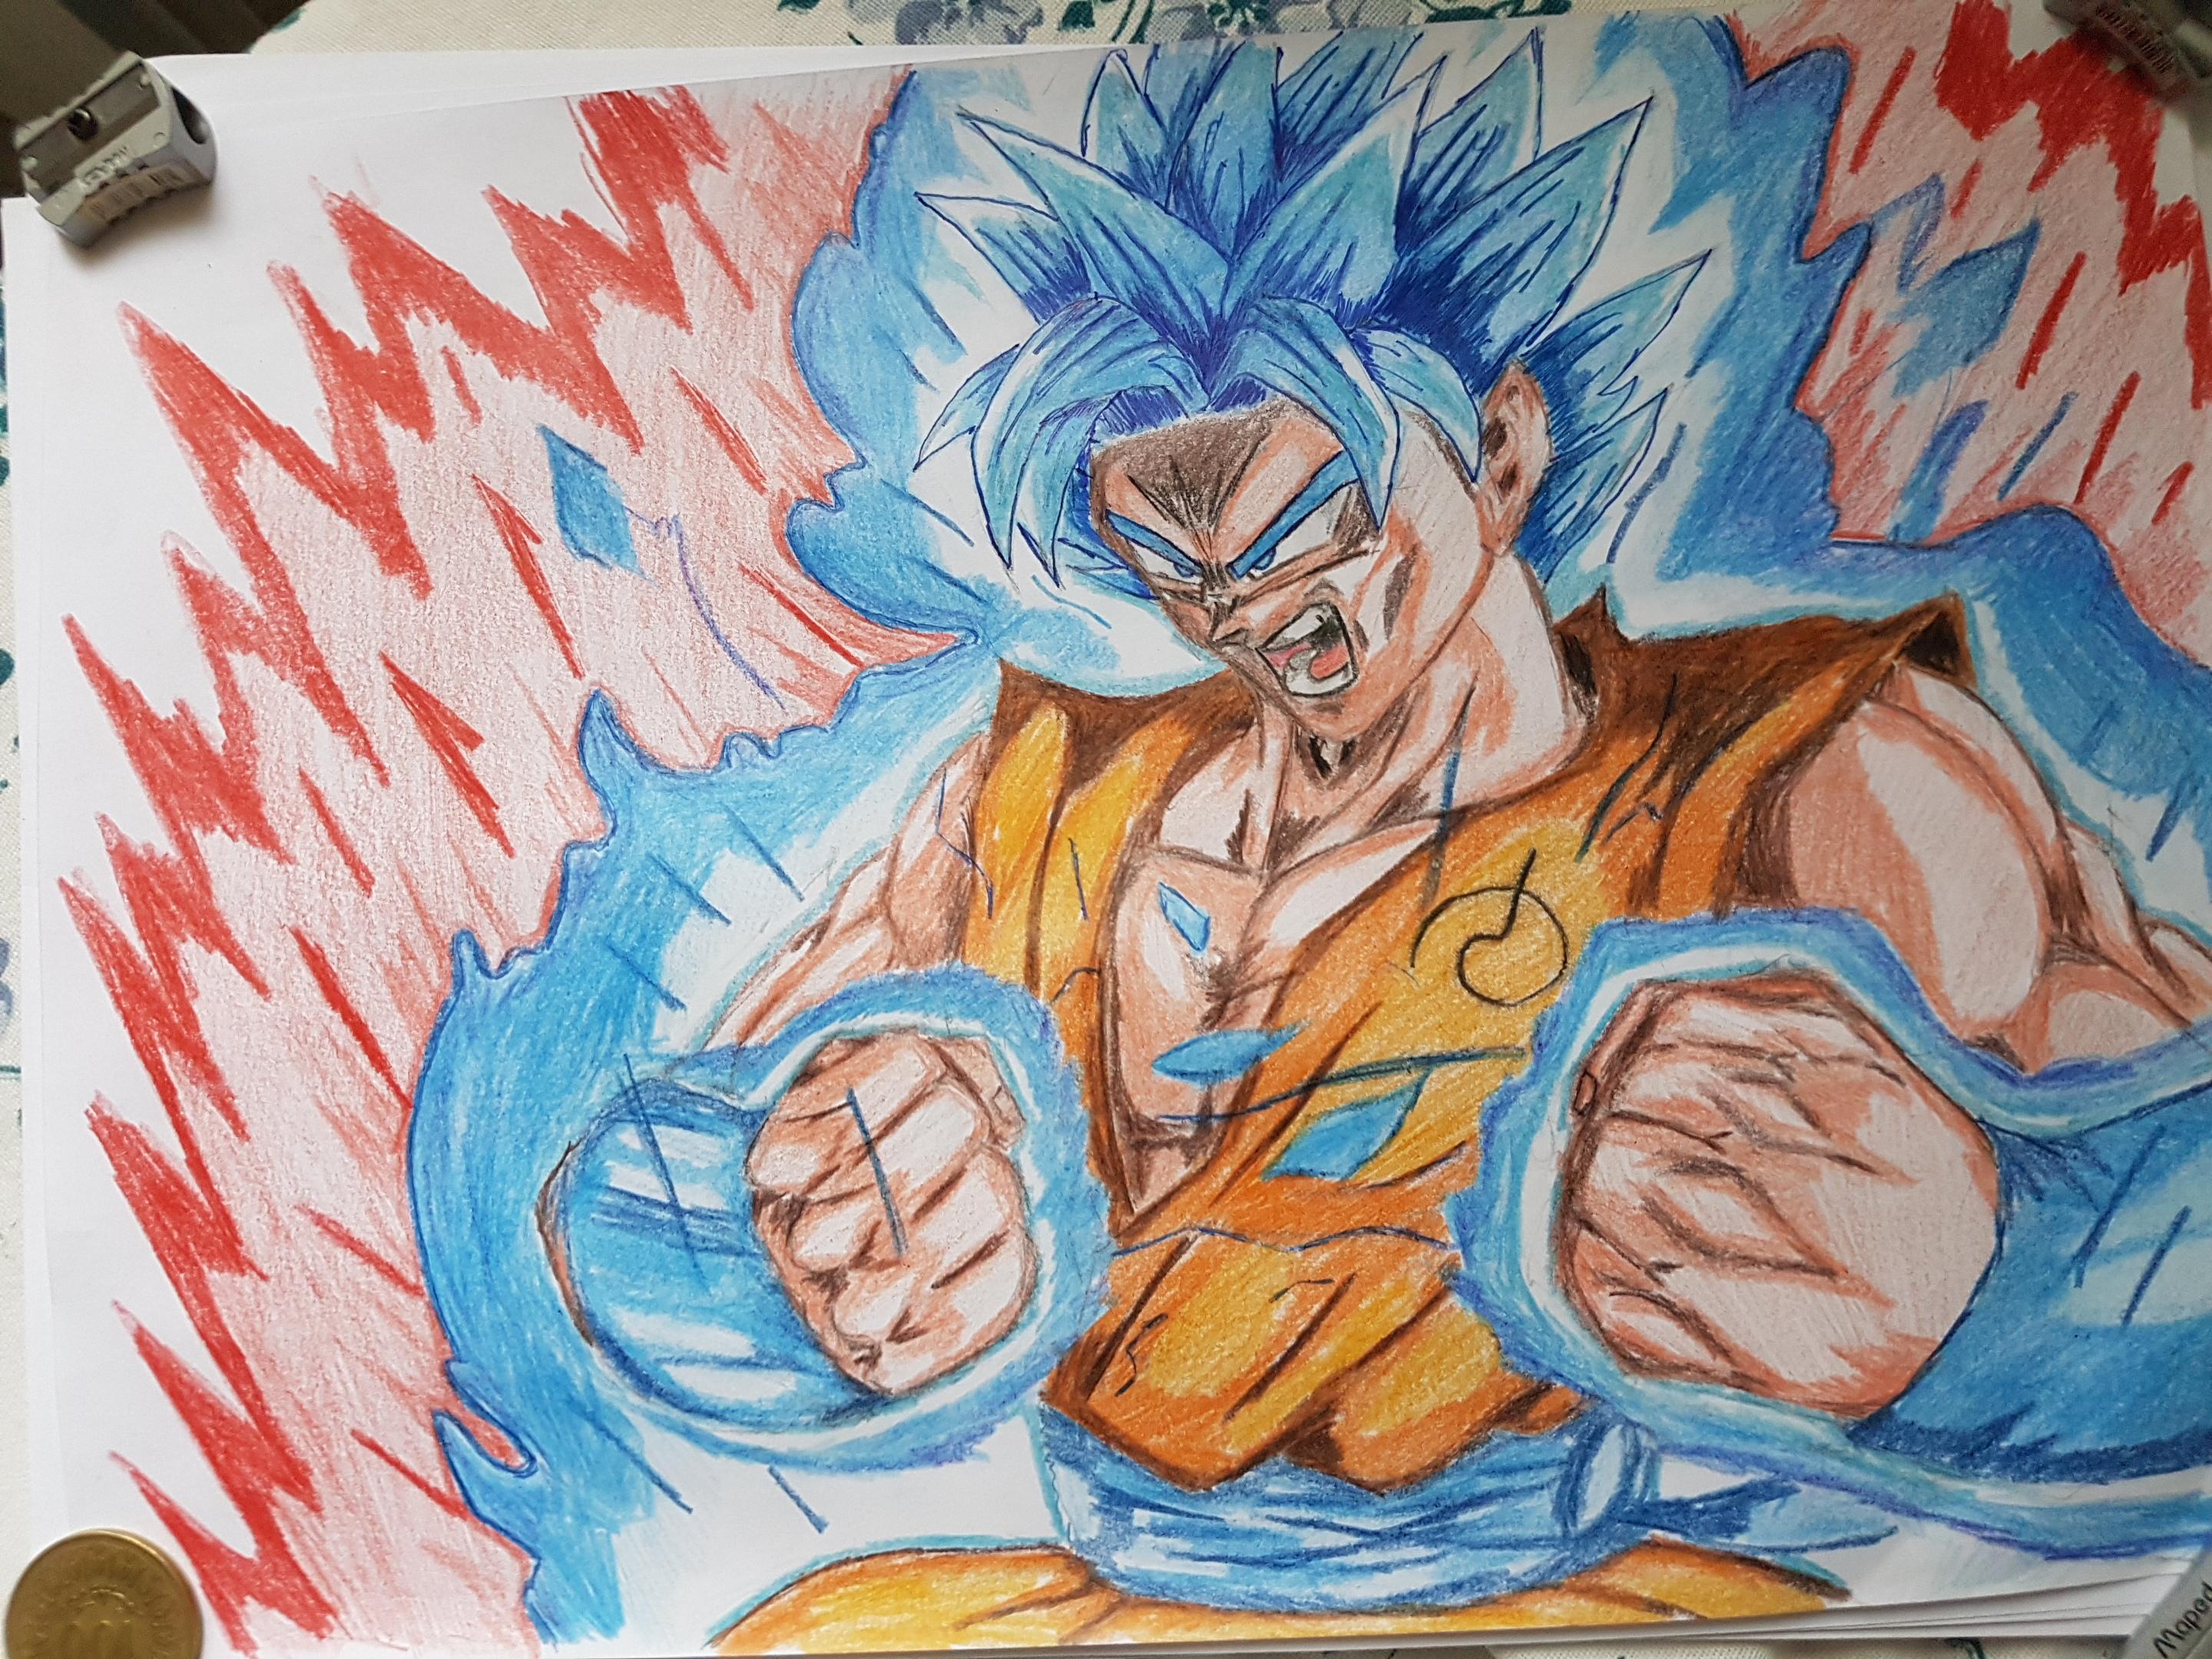 Goku Drawing with Blue Hair - wide 4